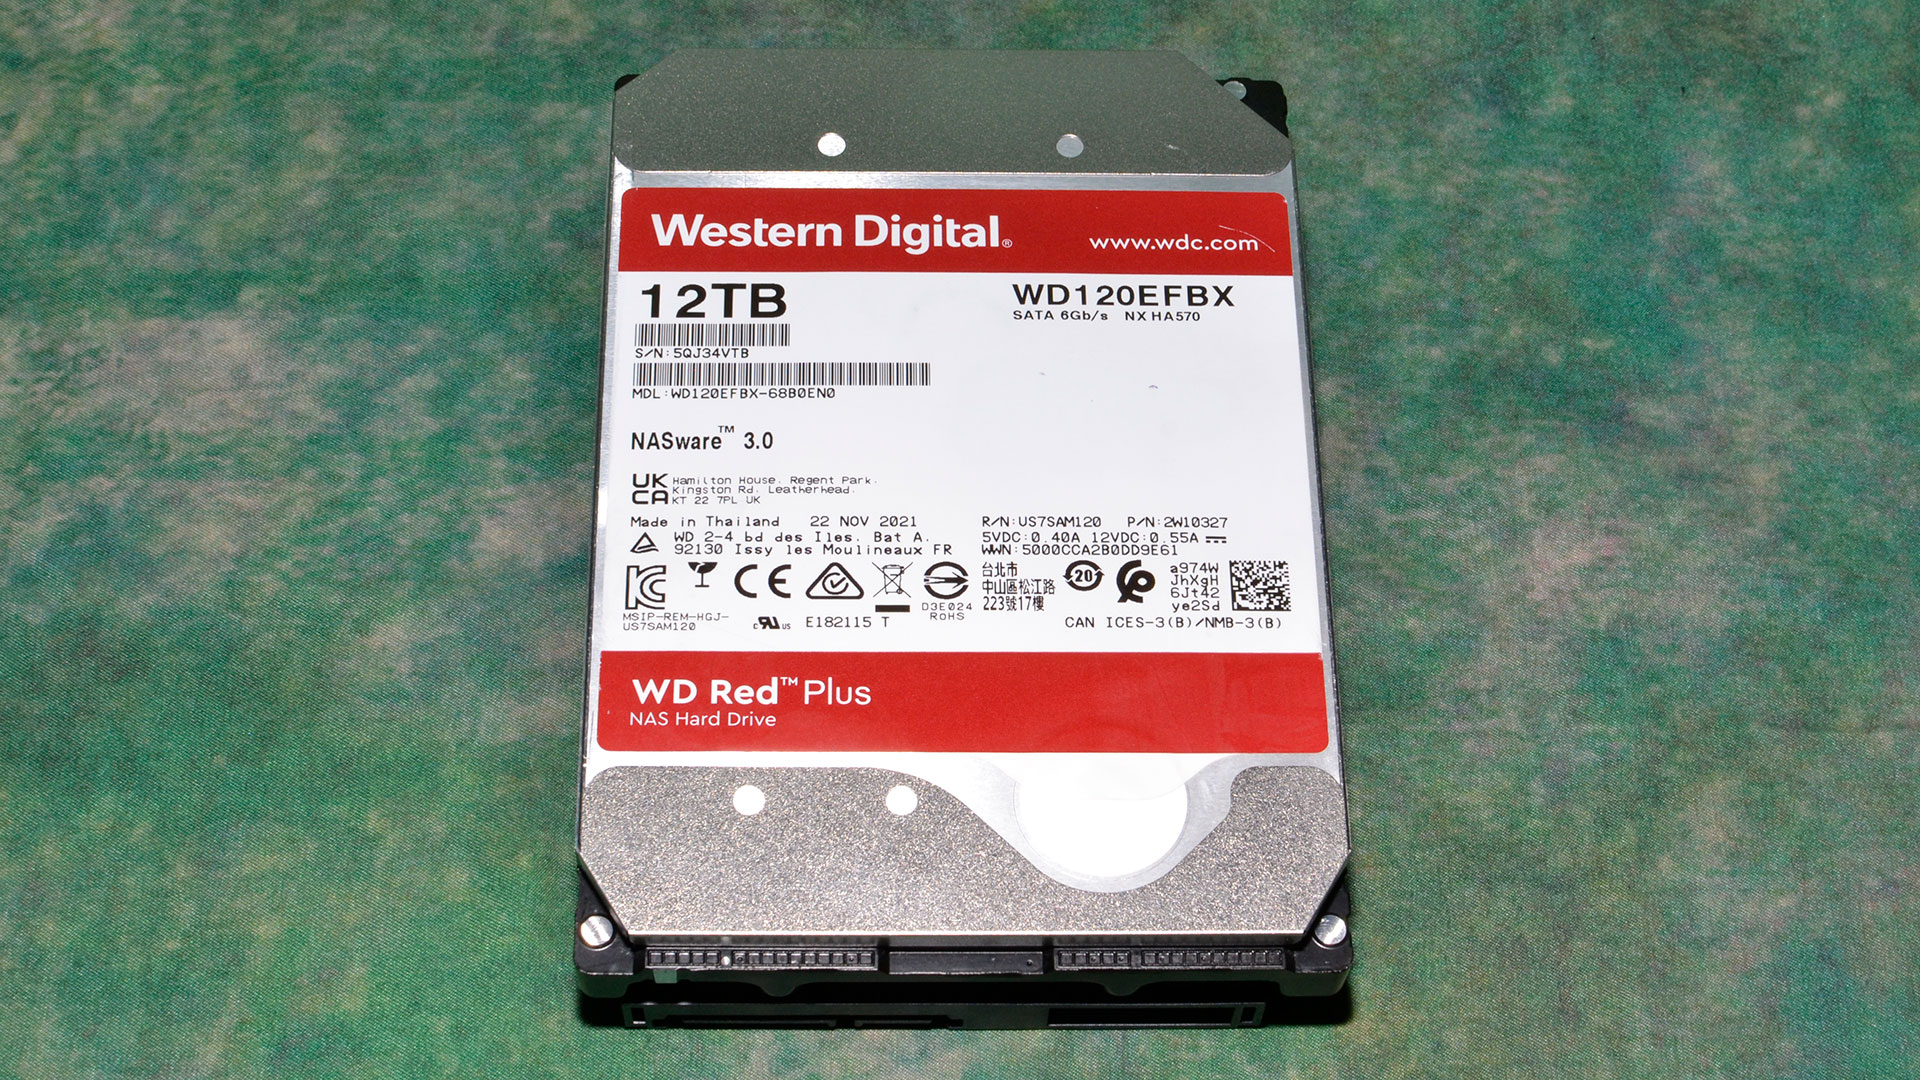 WD Red Pro 4TB Enterprise NAS HDD Review